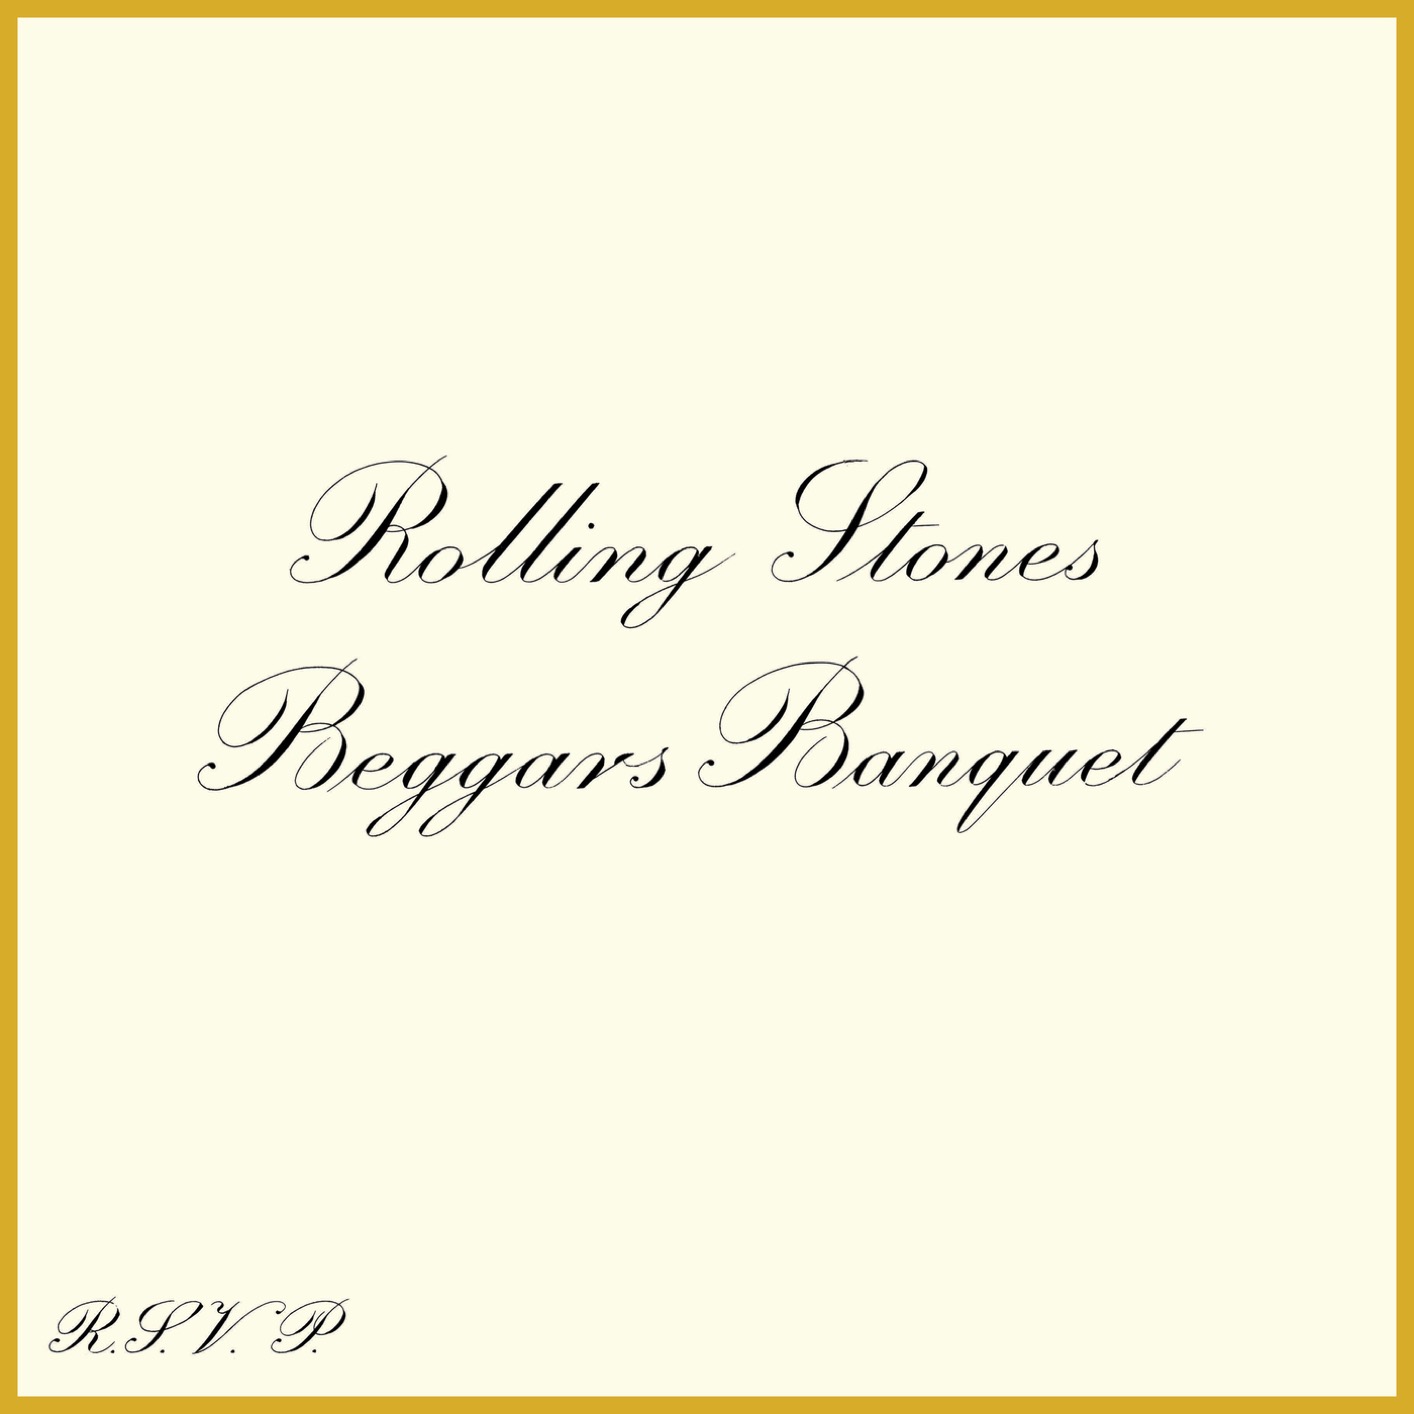 The Rolling Stones - Beggars Banquet (50th Anniversary Edition) (1968/2018) [FLAC 24bit/192kHz]